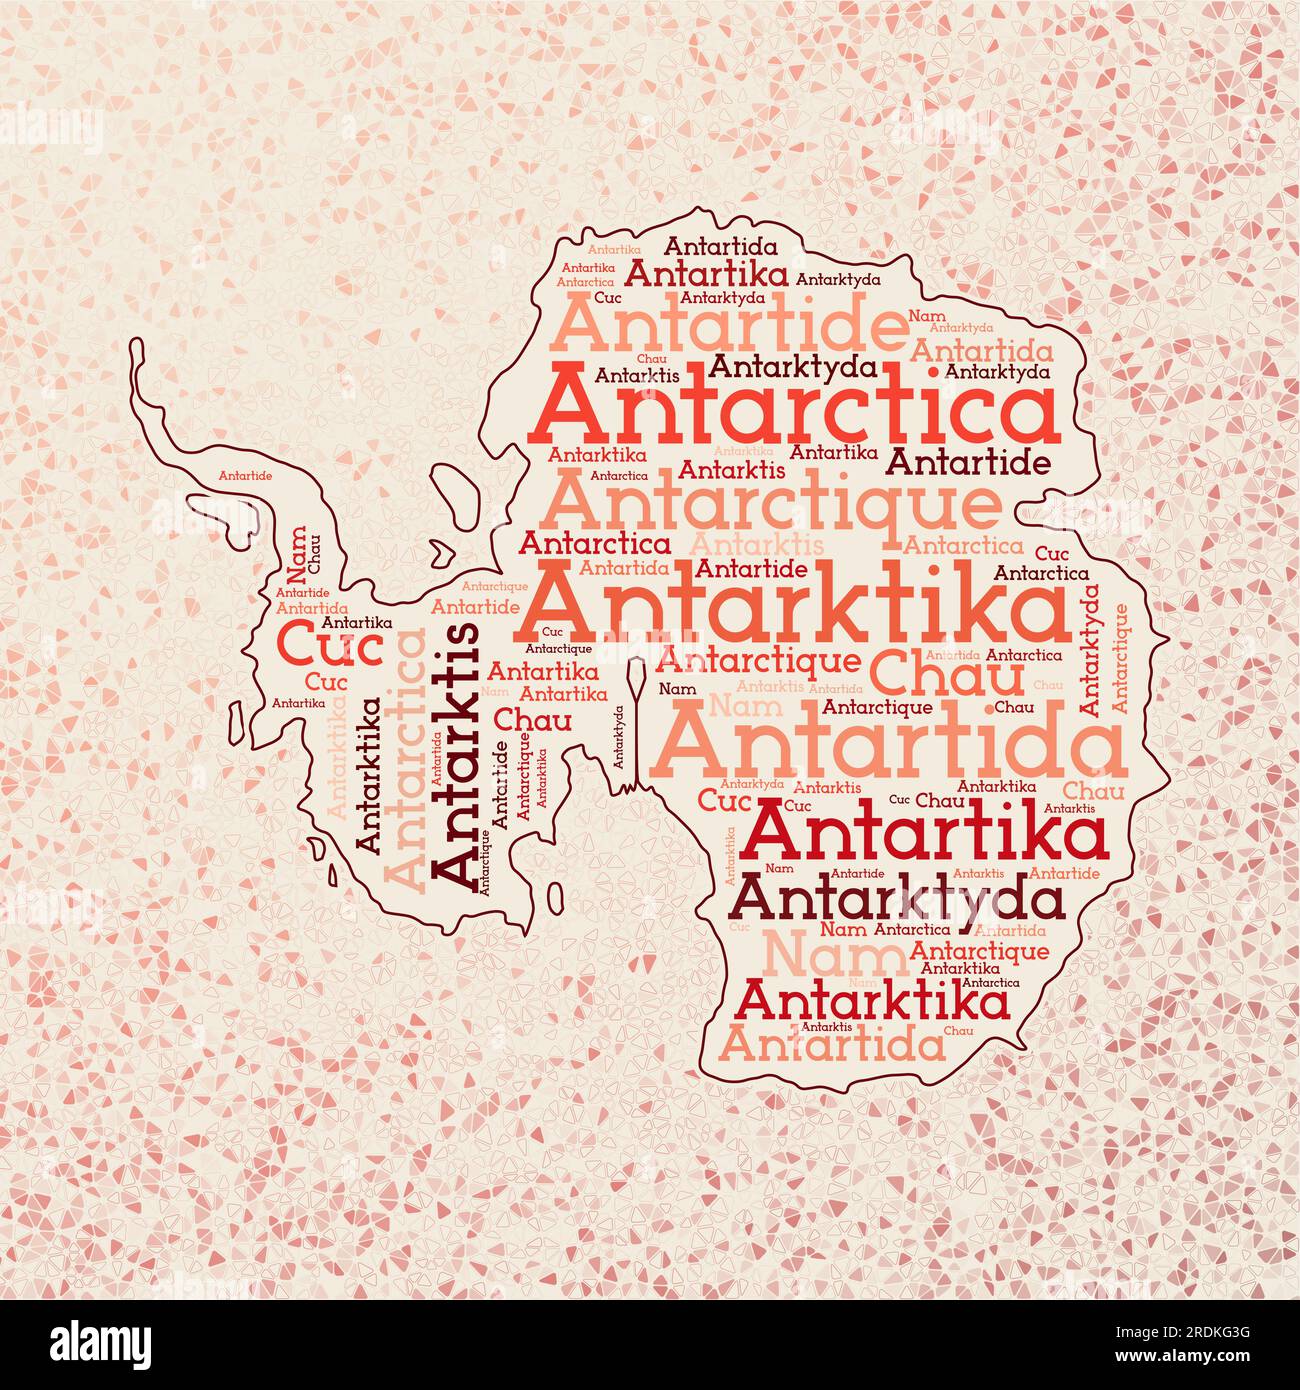 Antarctica shape whith country names word cloud in multiple languages. Antarctica border map on powerful triangles scattered around. Artistic vector i Stock Vector